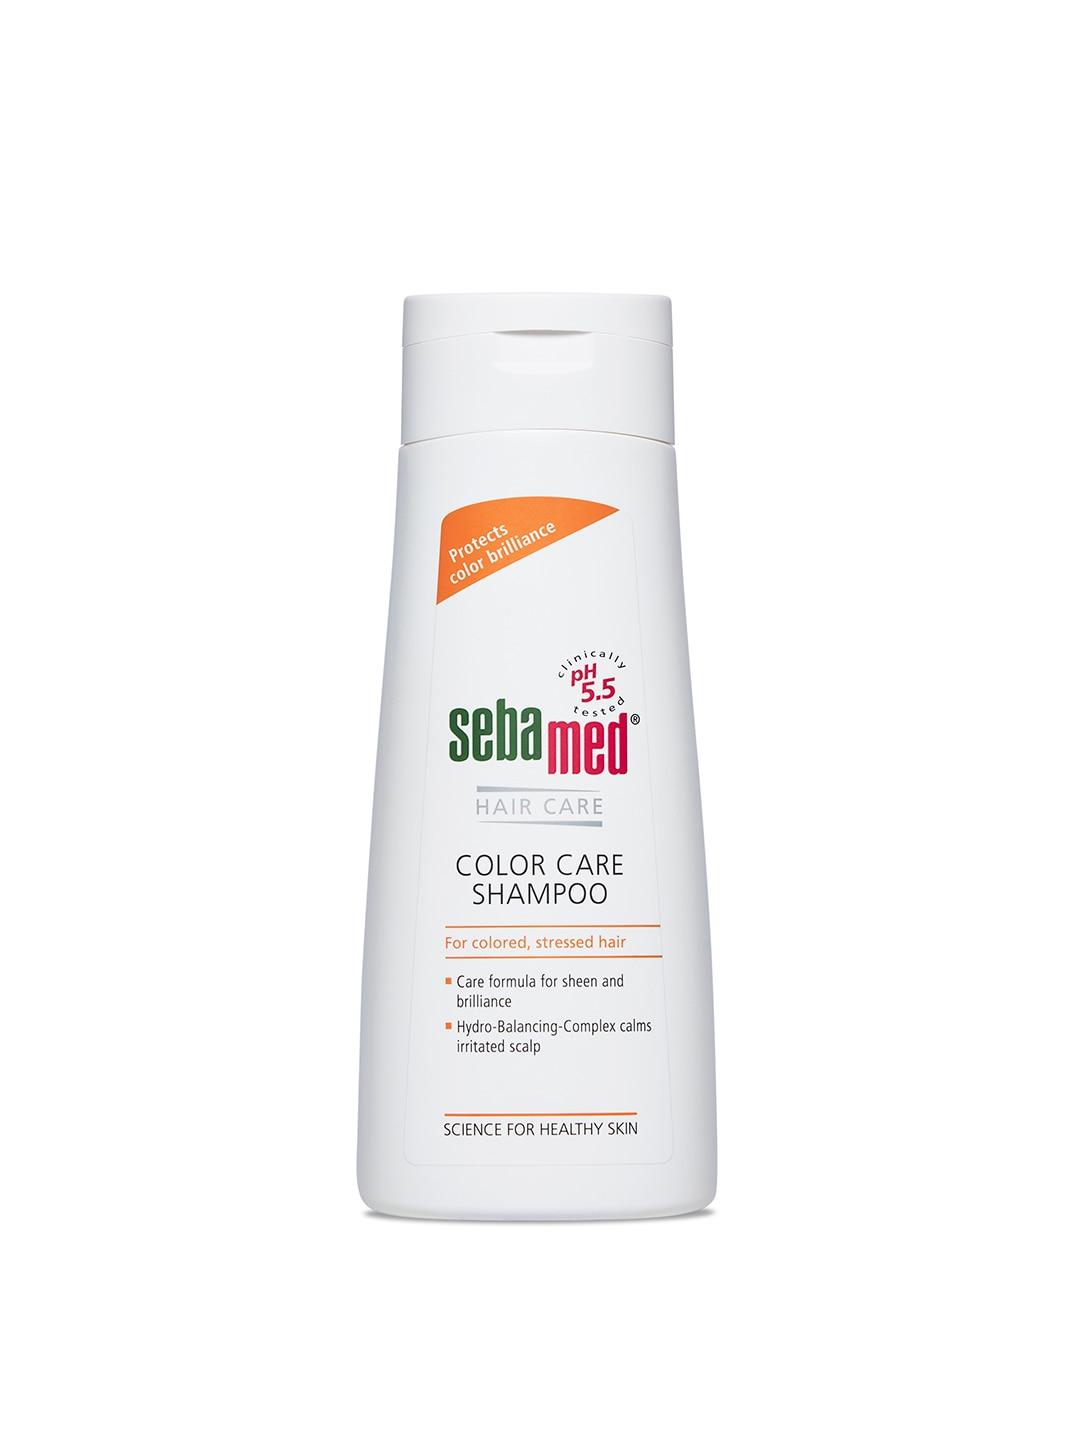 Sebamed Color Care Shampoo for Colored Hair with Hydro-Balancing-Complex - 200ml